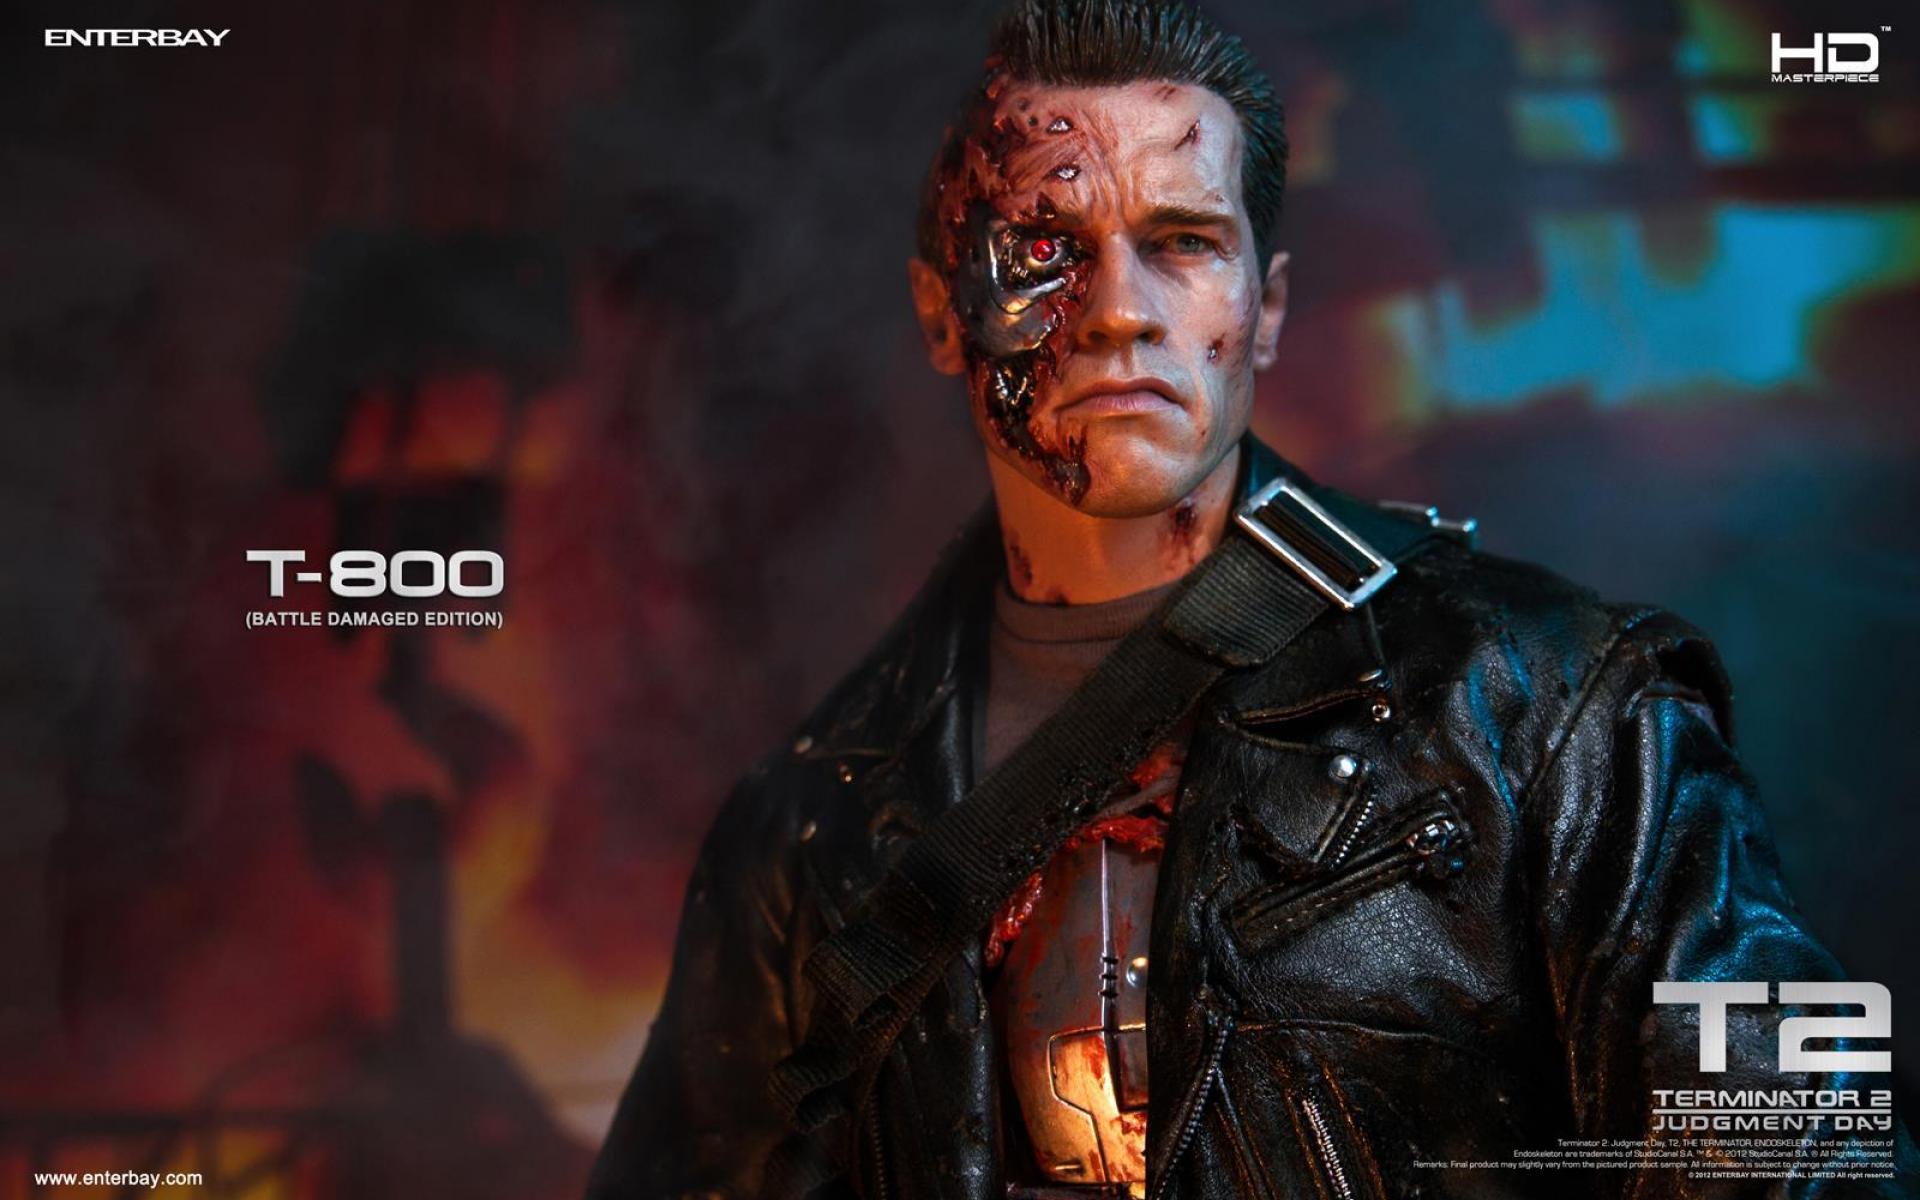 Terminator 2 judgement day - - High Quality and other